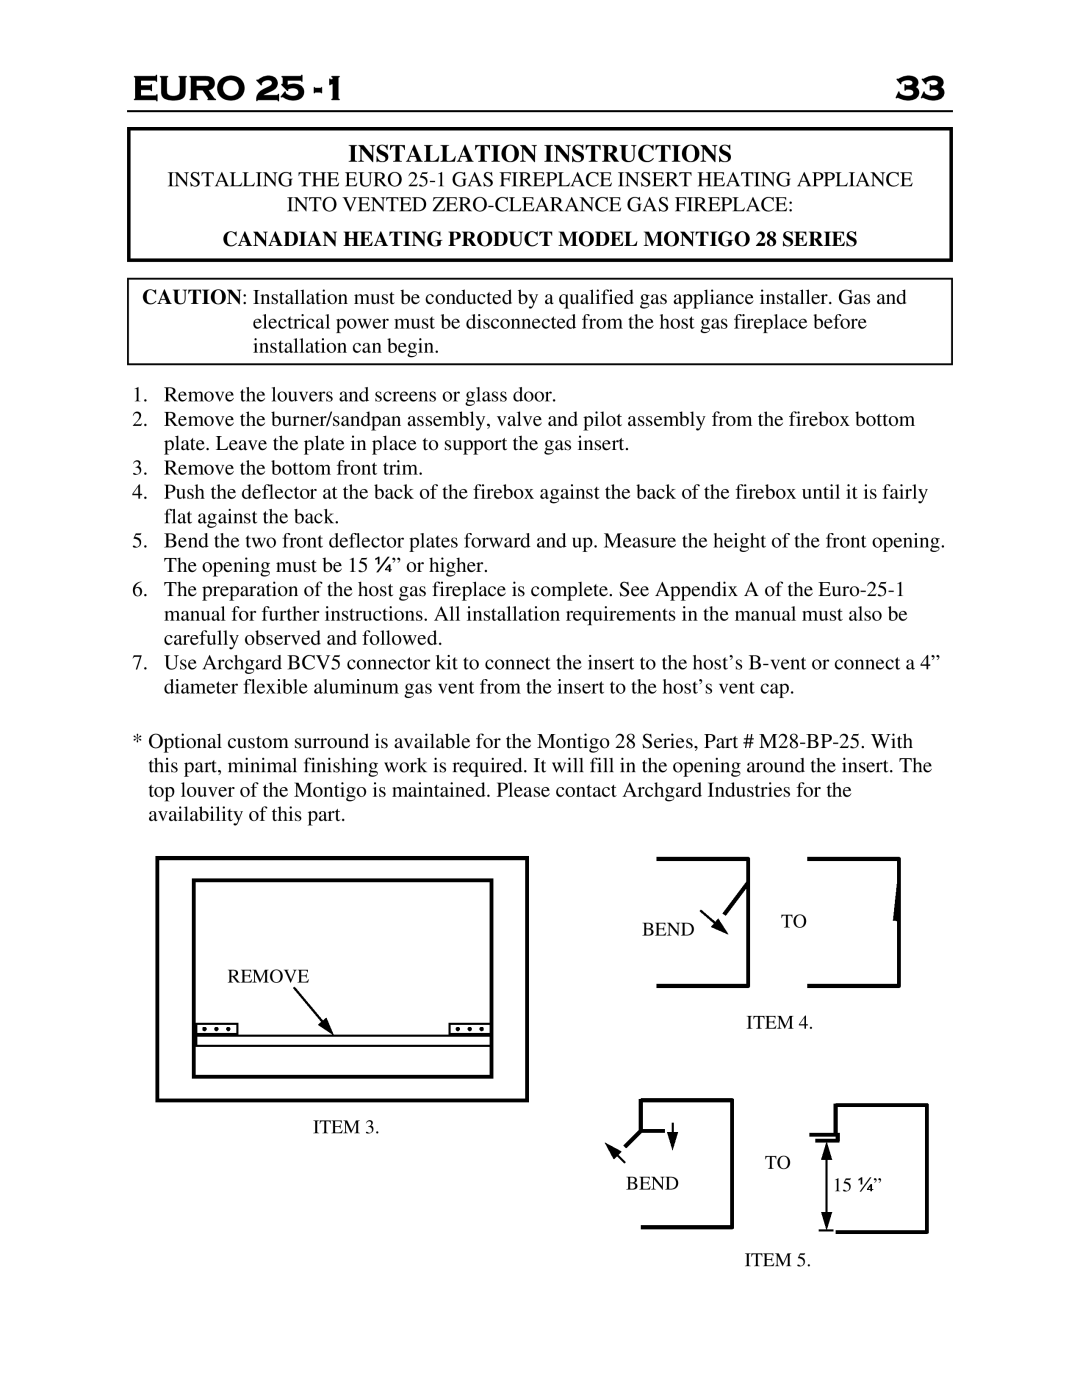 Delkin Devices EI - 25-1 manual Installation Instructions, Euro 